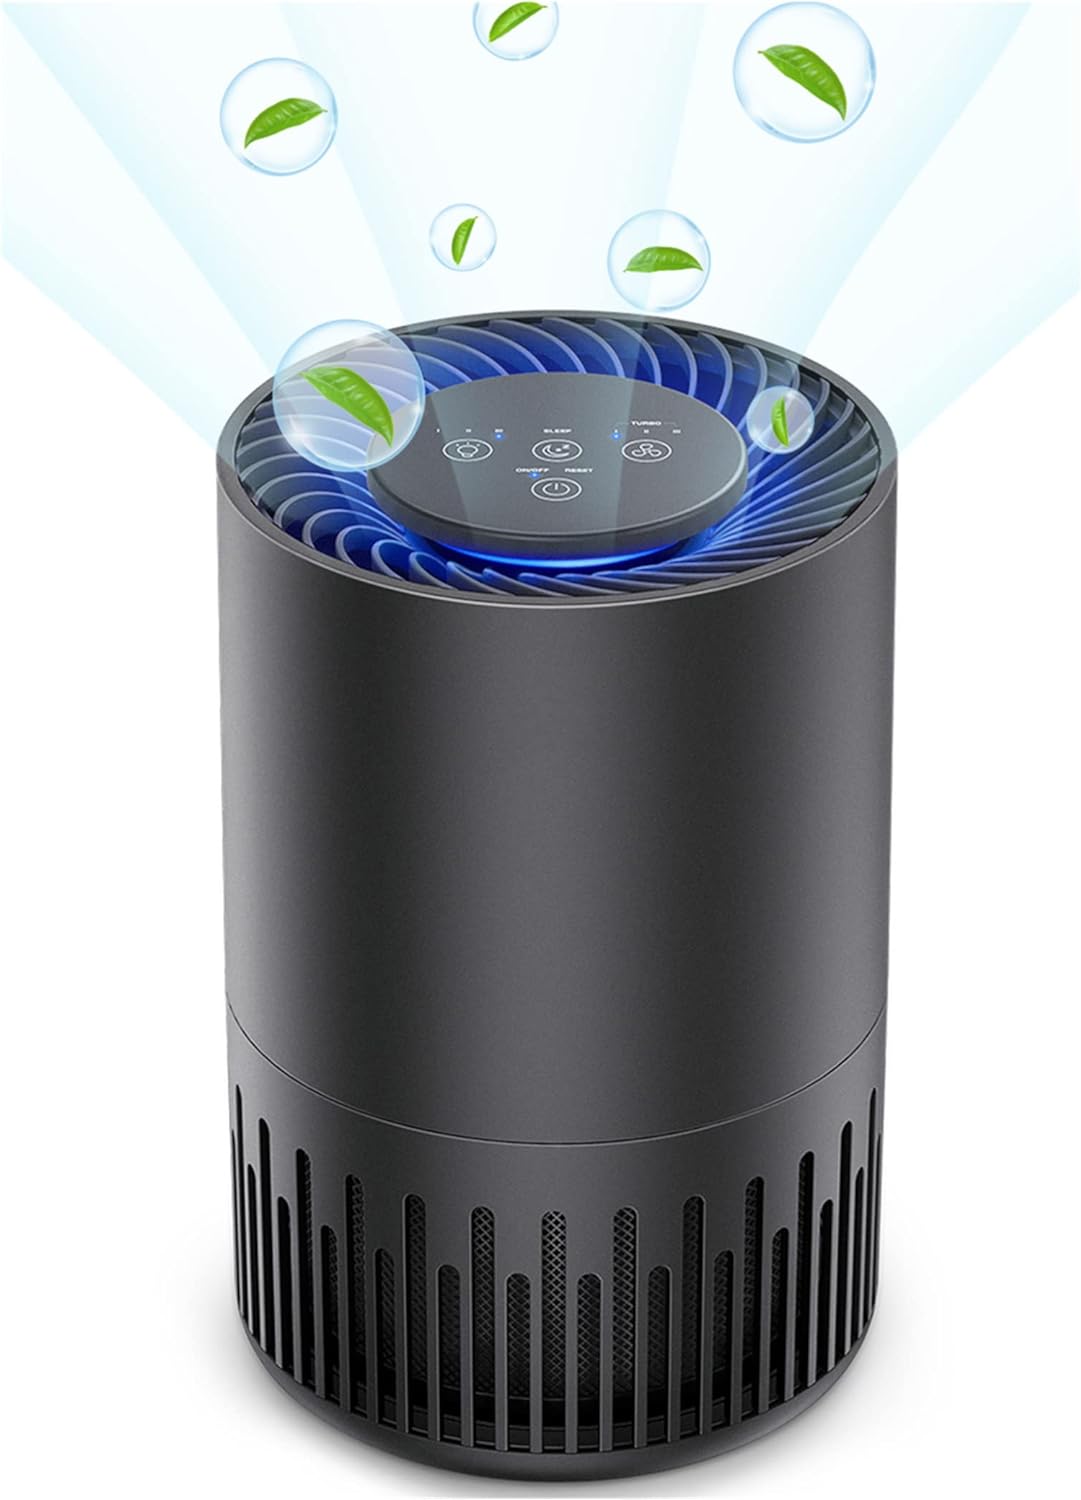 HEPA Air Purifier for Bedroom, Portable Air Cleaner with H13 HEPA Filter, 4 Fan Speeds